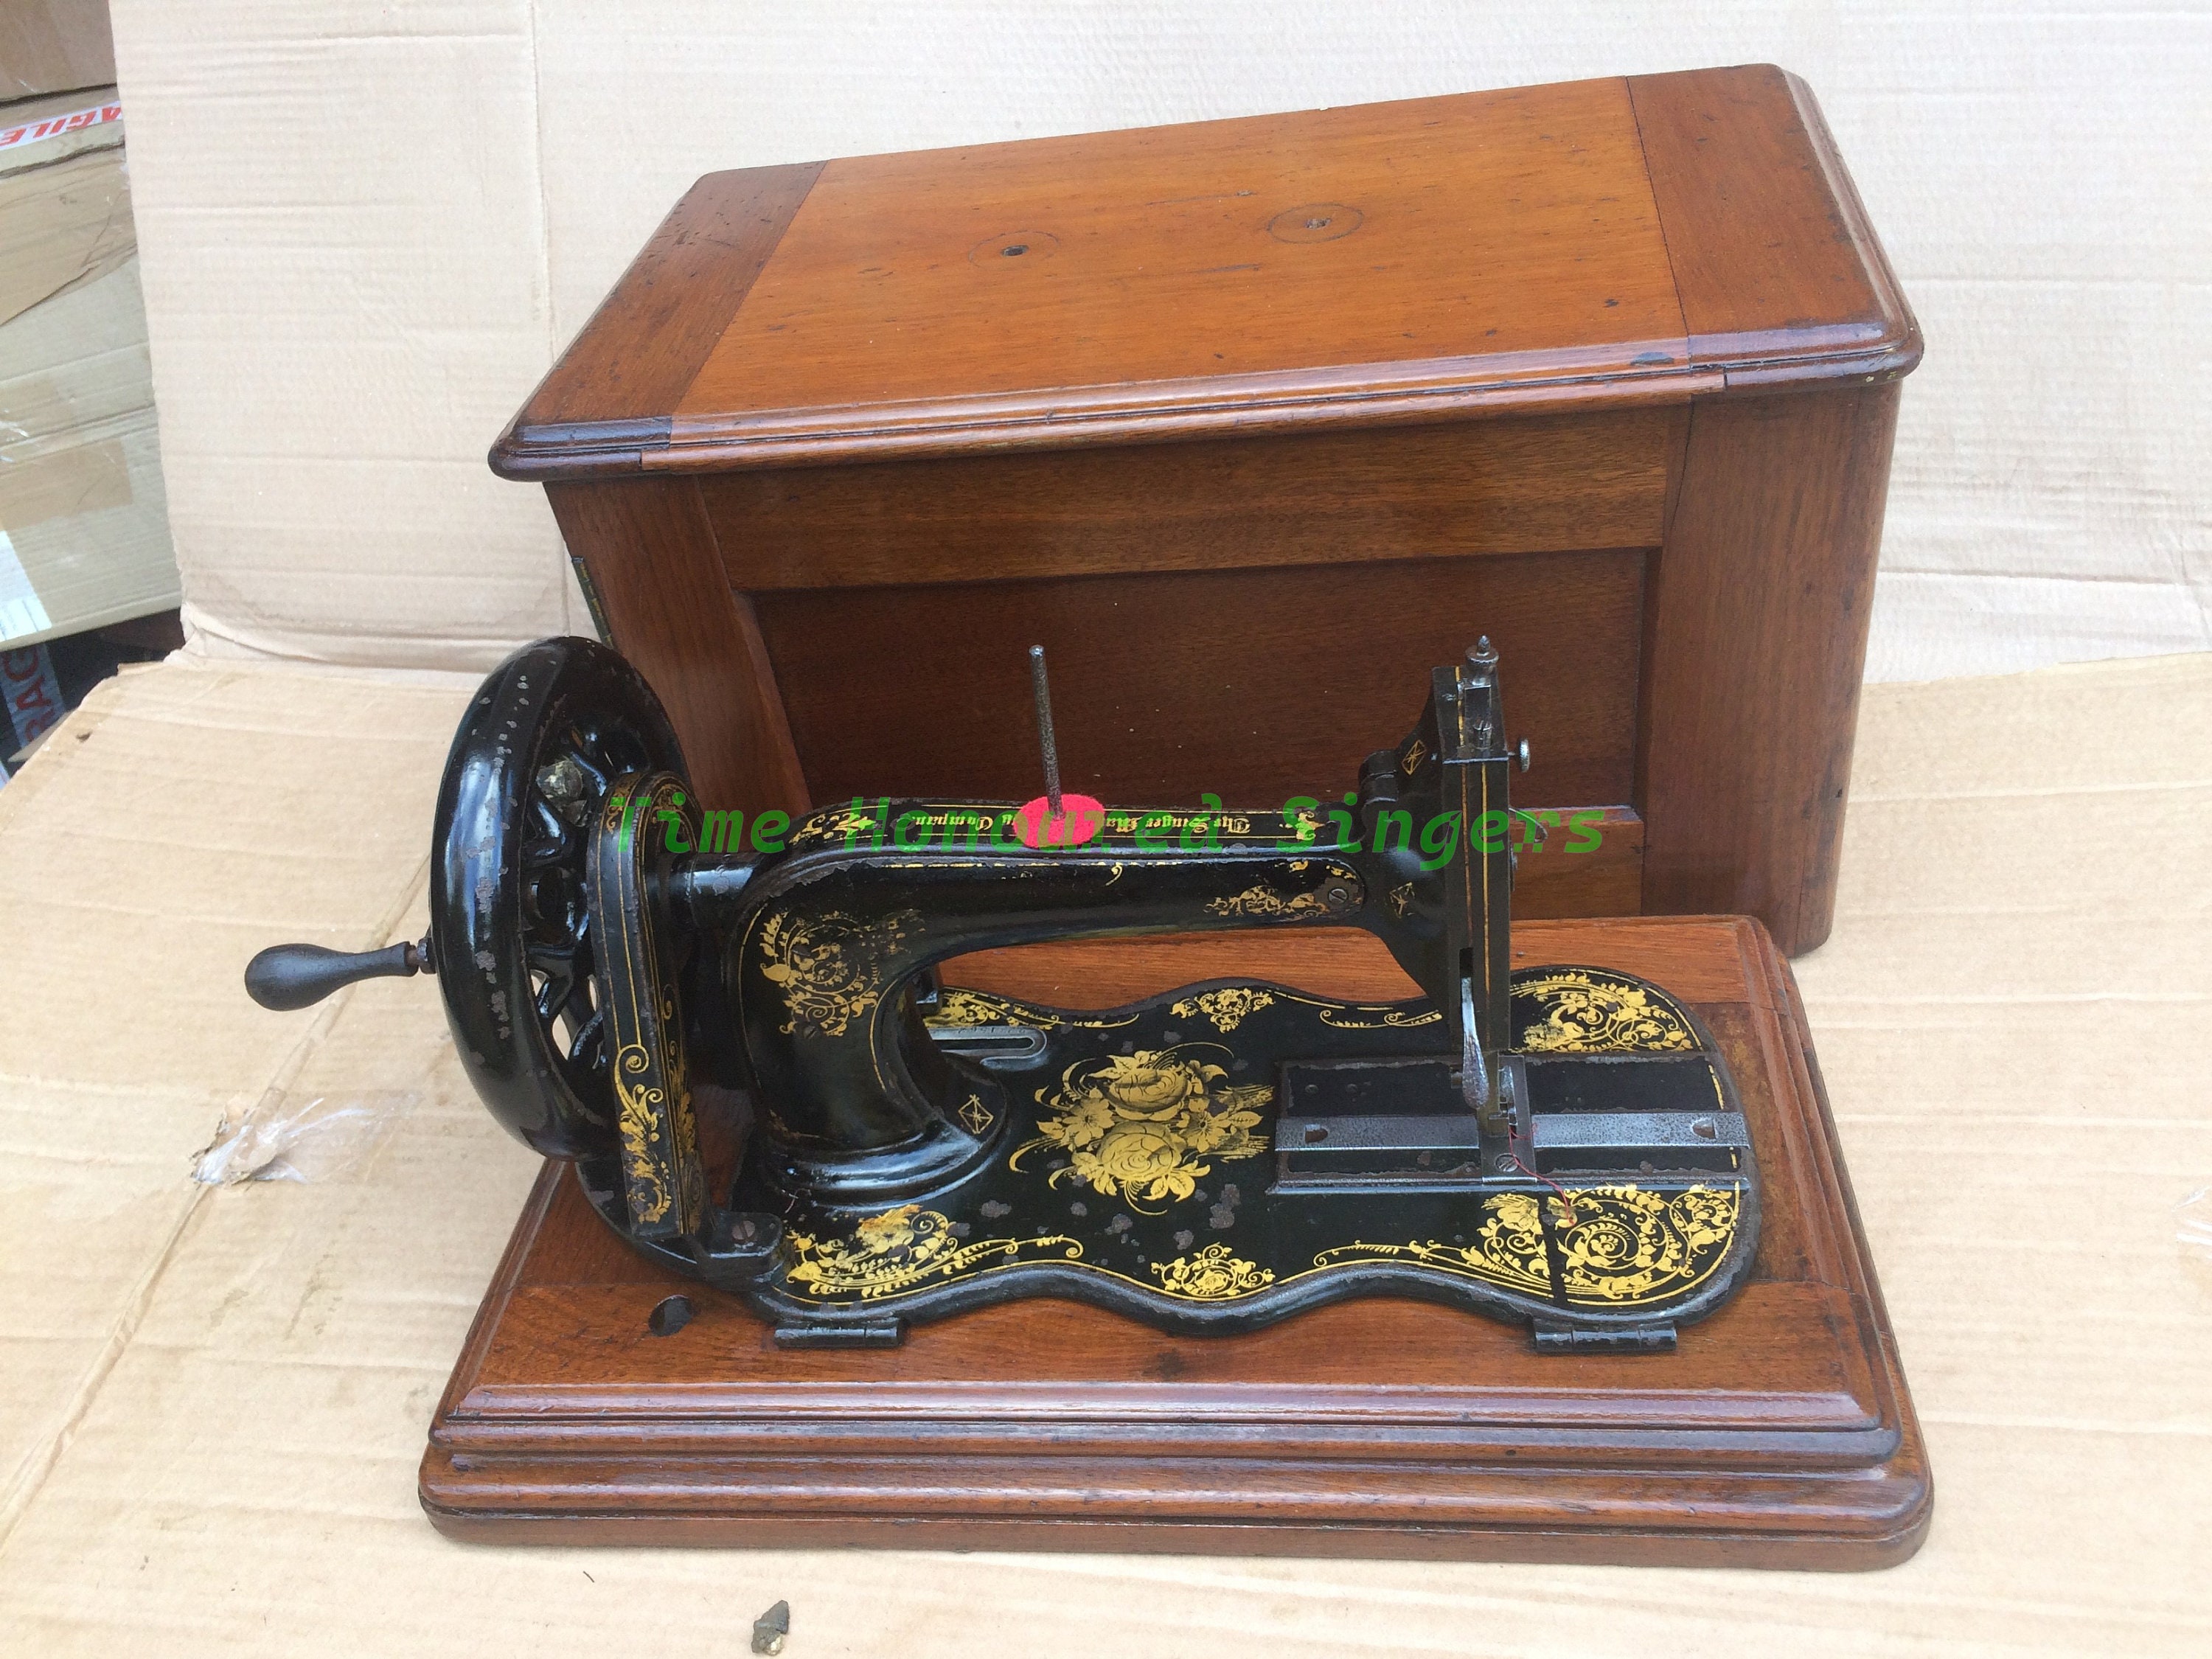 SINGER SIMANCO Sewing Machine Motor, Light, Pedal Cabling Serviced &  Restored by 3FTERS 